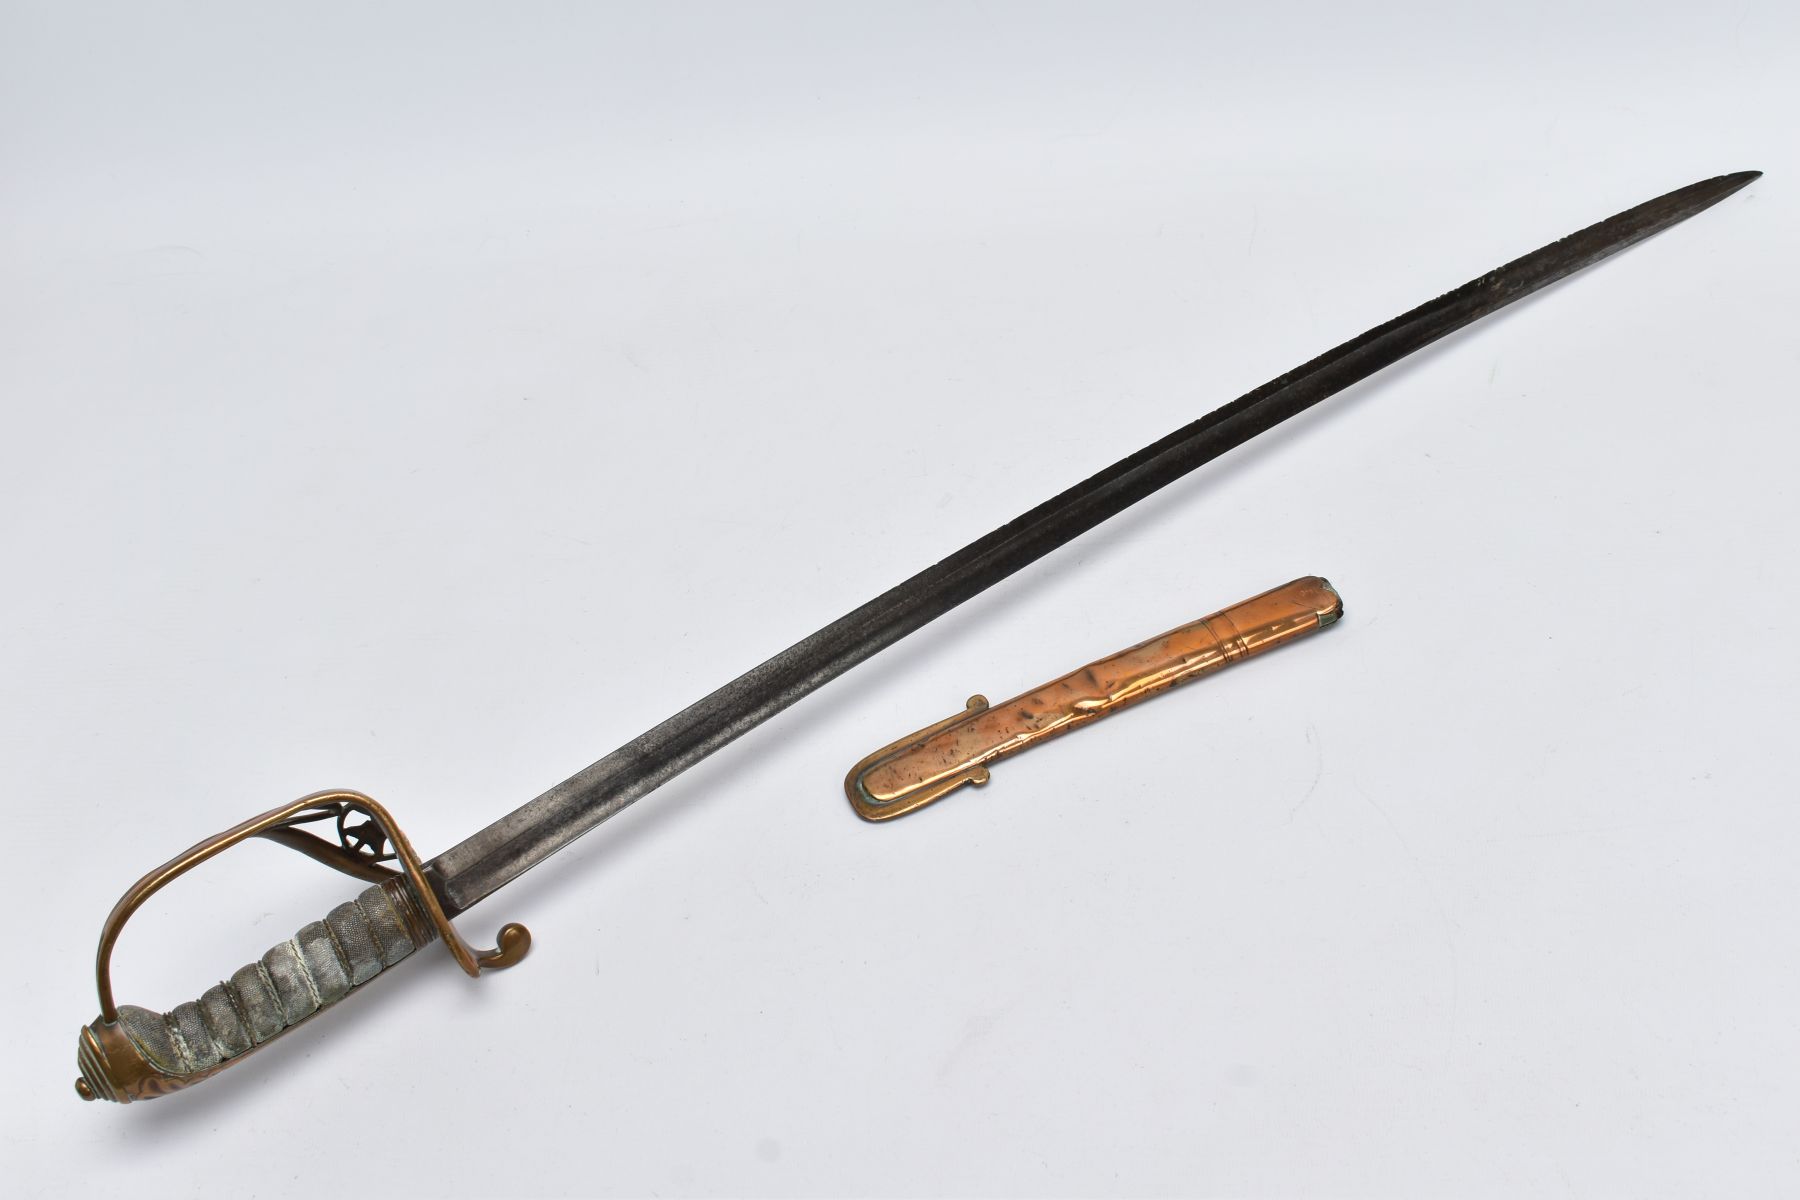 A BRITISH VICTORIAN ERA INFANTRY OFFICERS SWORD (possibly 1845 pattern), no scabbard apart from - Image 8 of 13